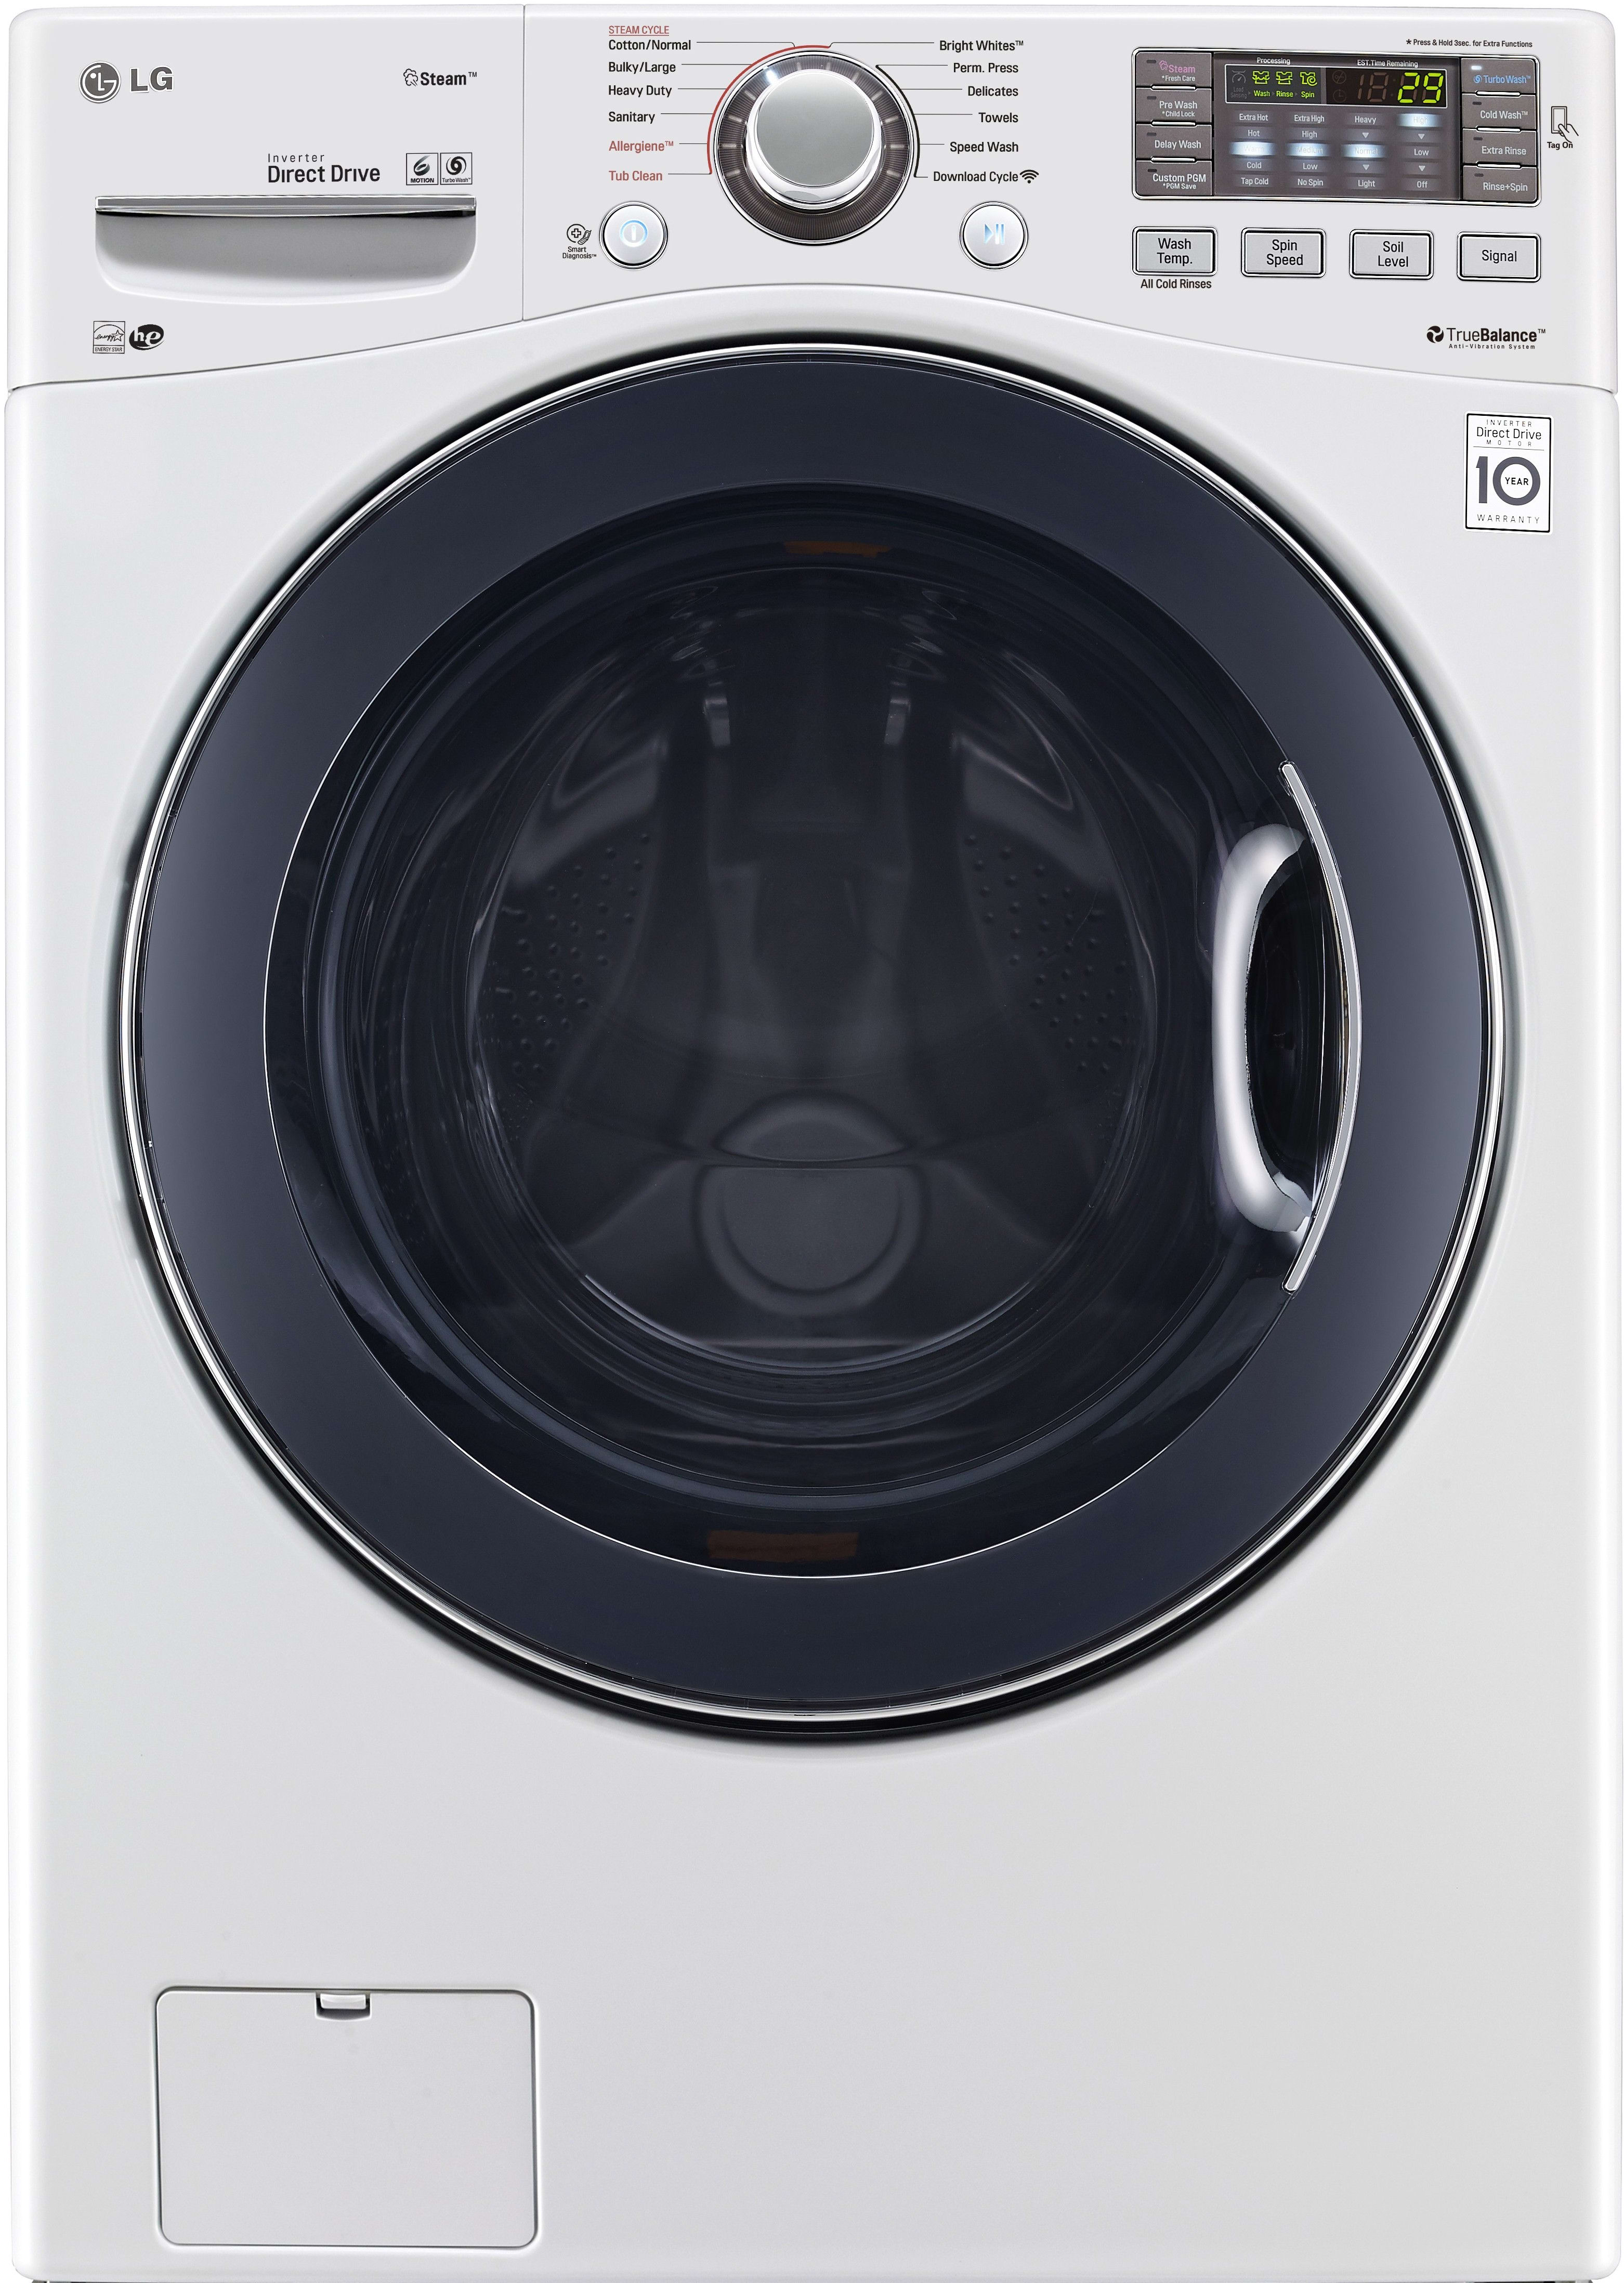 howards-samsung-washer-and-gas-dryer-front-load-899-99-after-rebates